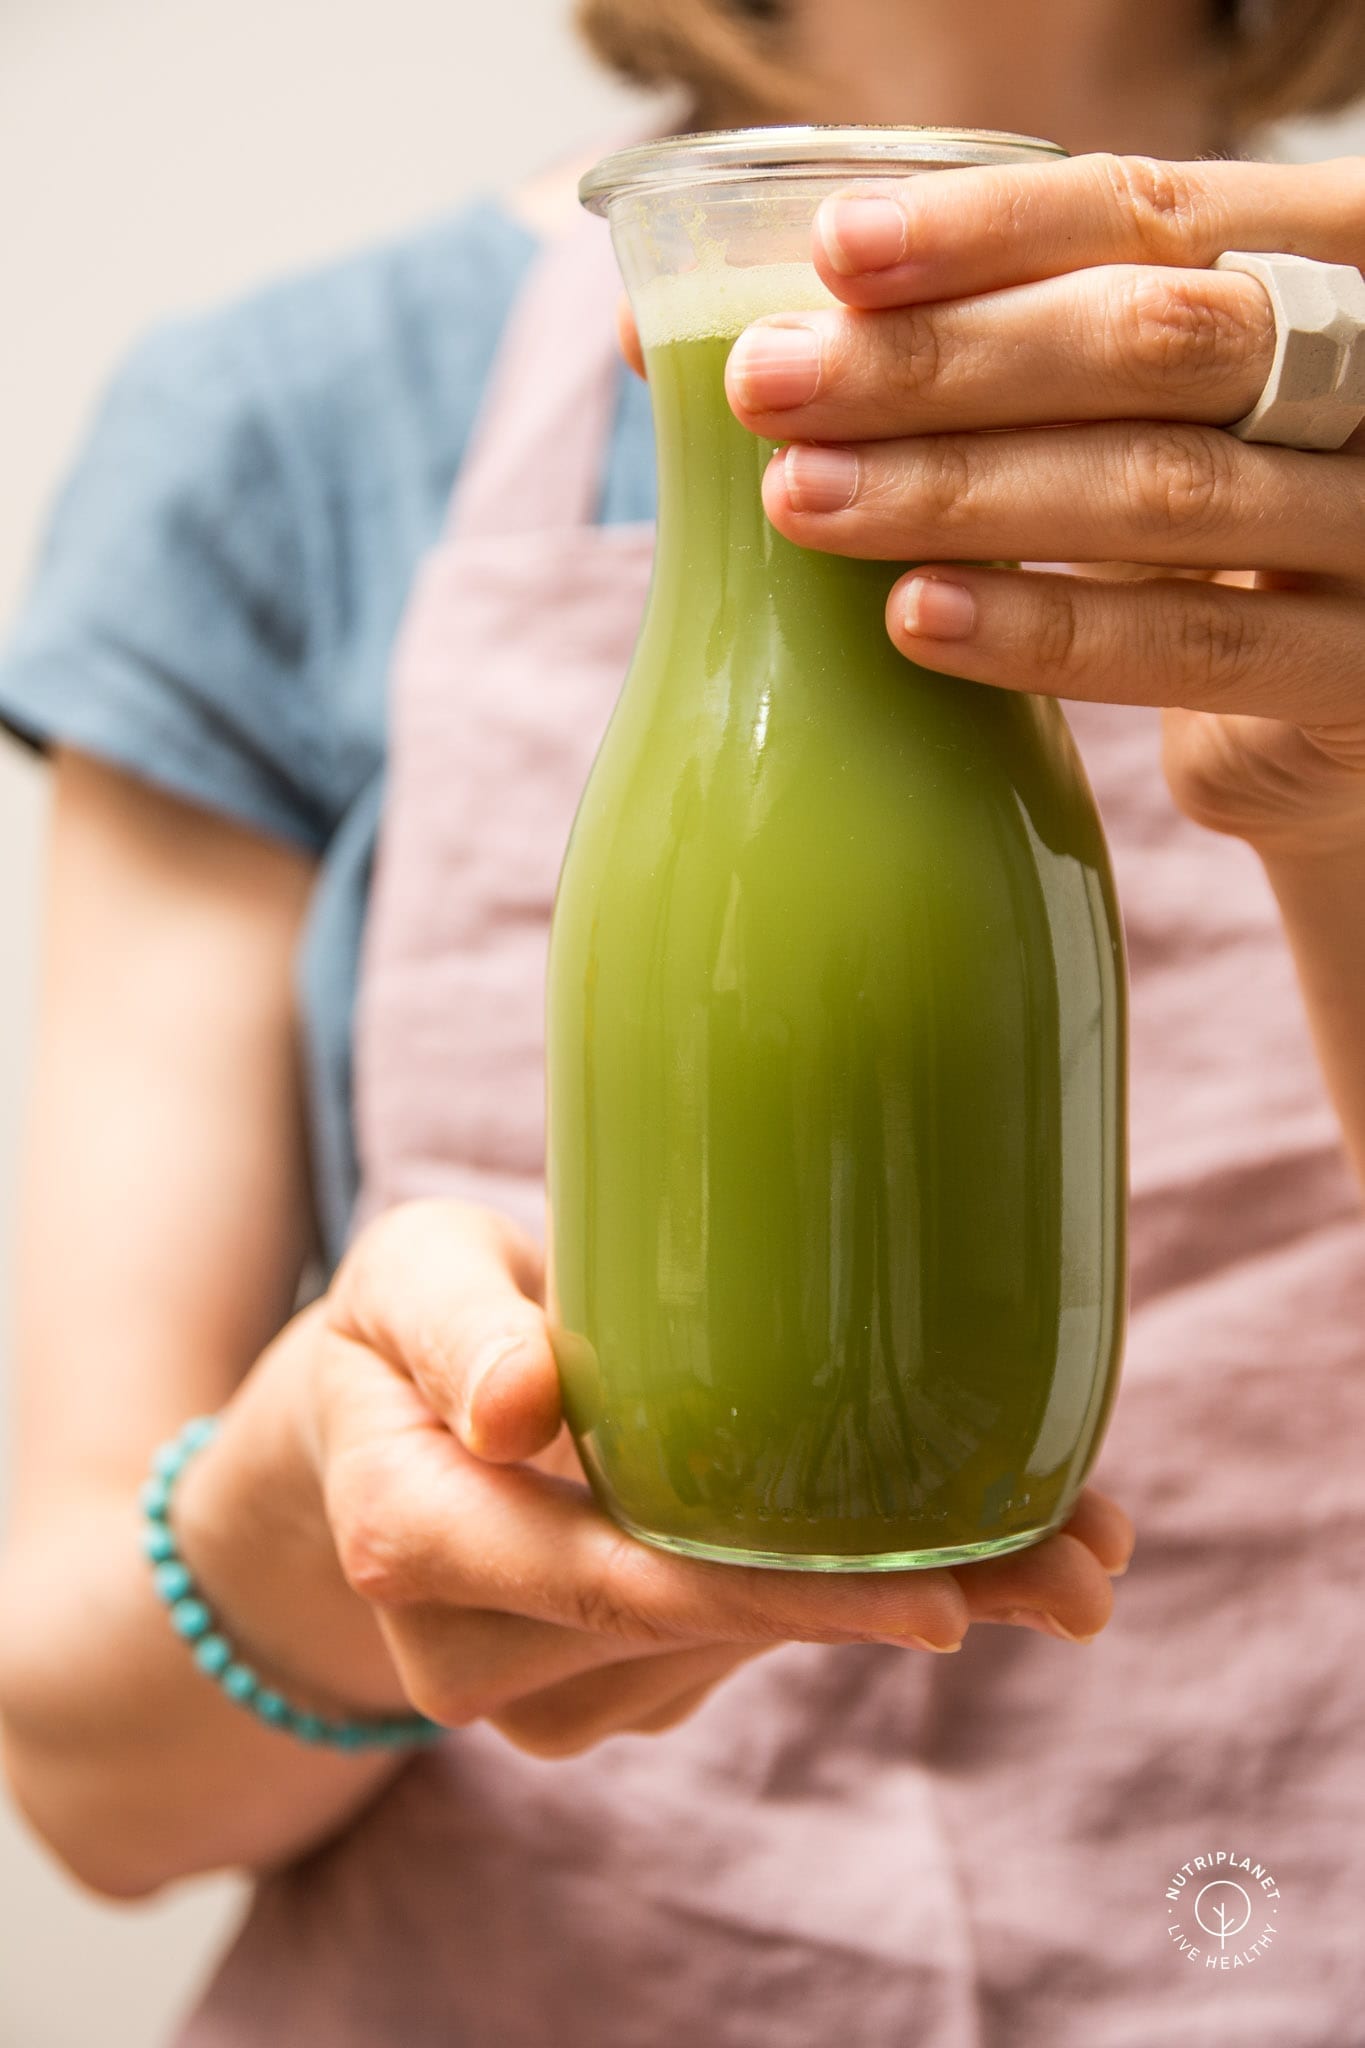 Celery juice benefits, my experience and the correct way to drink it.